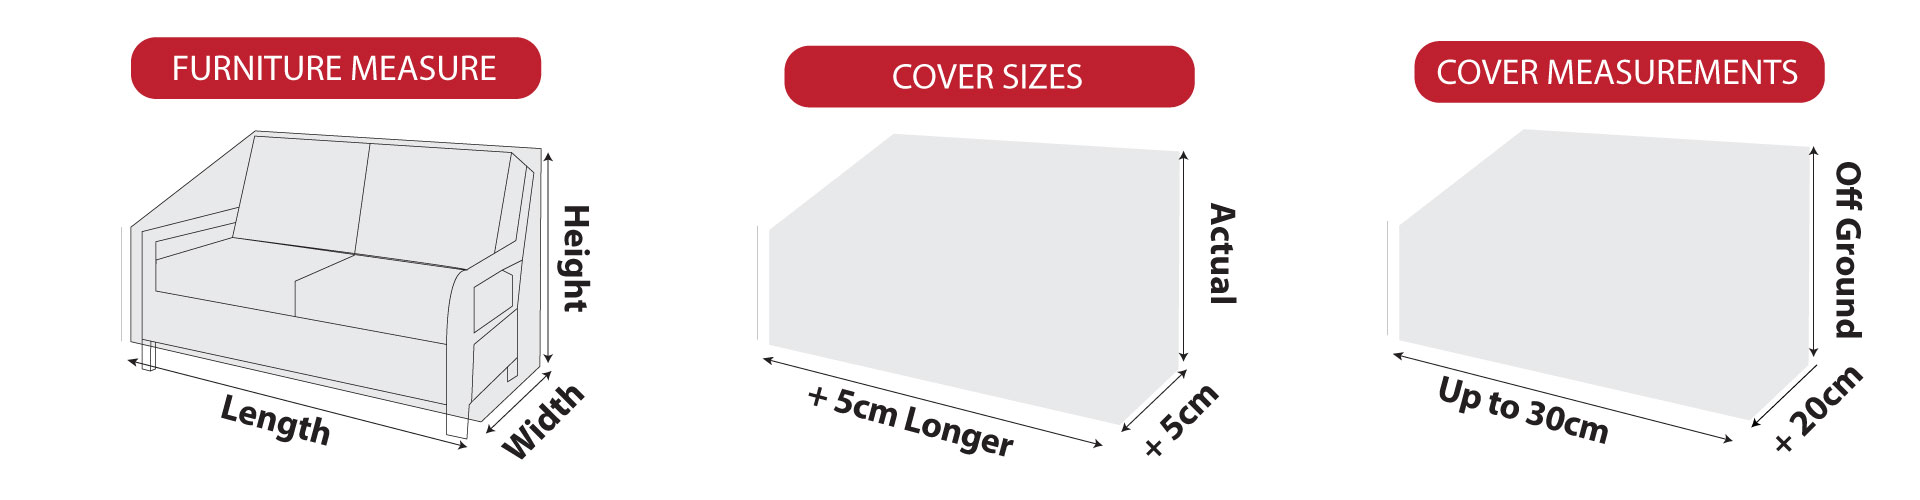 how to measure furniture for a cover